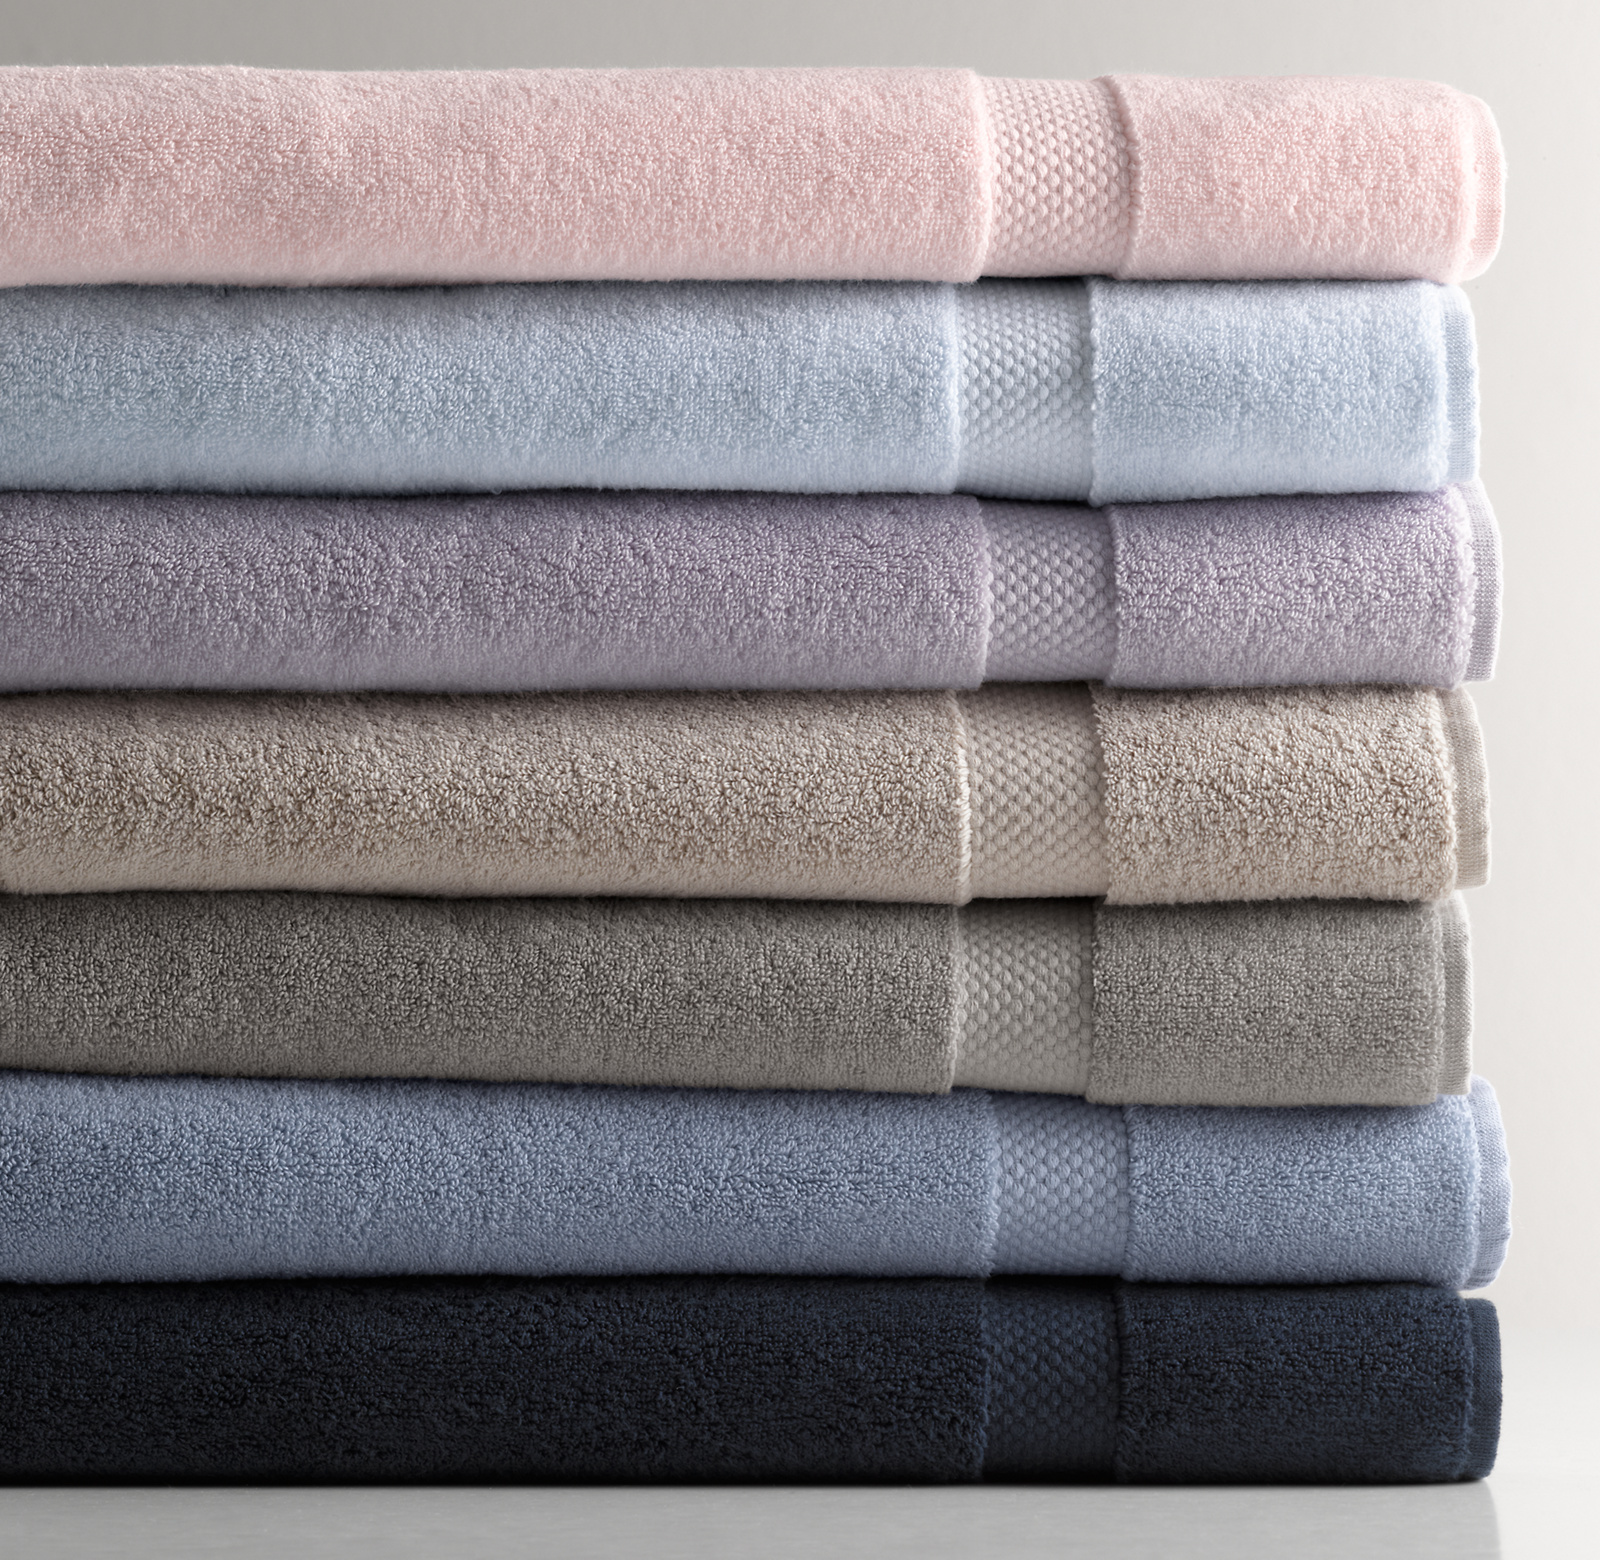 Shown (top to bottom) in petal, cloud, lilac, dove, grey, marine and navy.